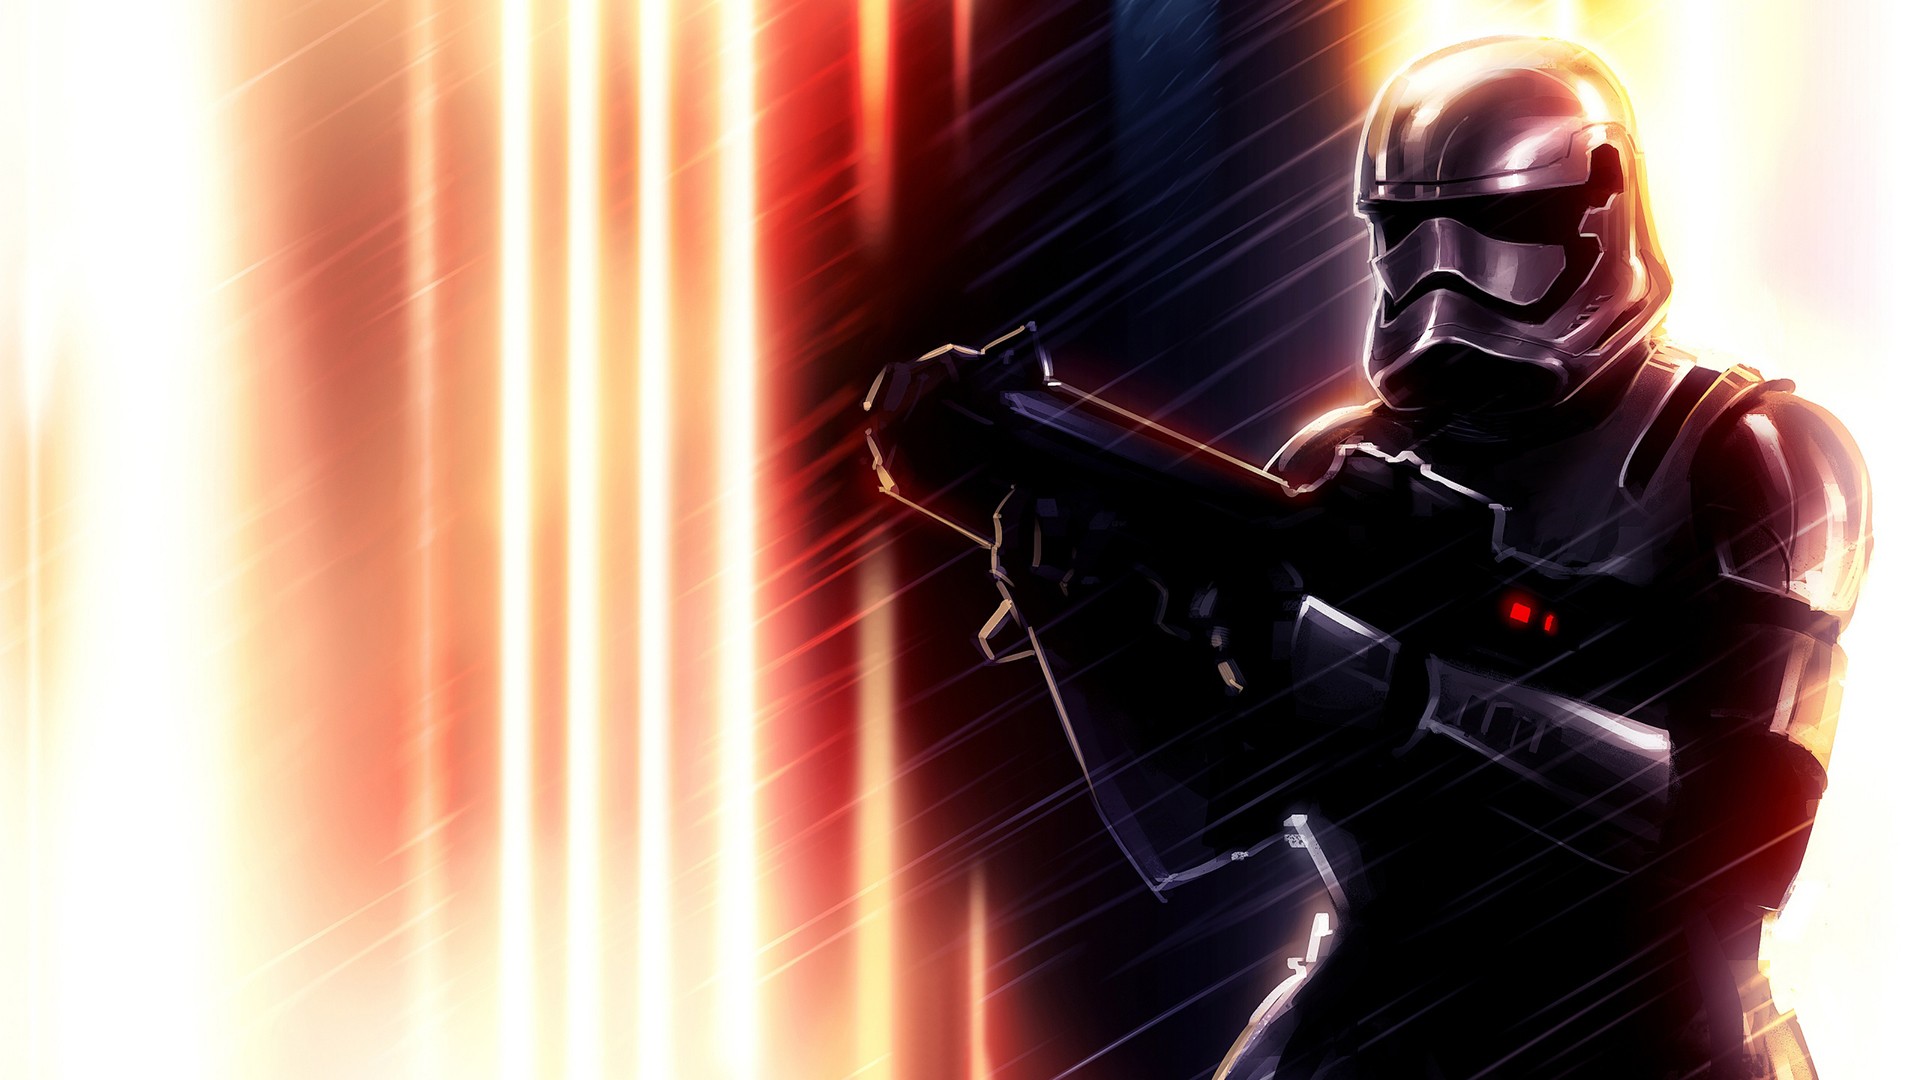 Star Wars Storm Troopers The First Order Soldier Artwork Science Fiction 1920x1080